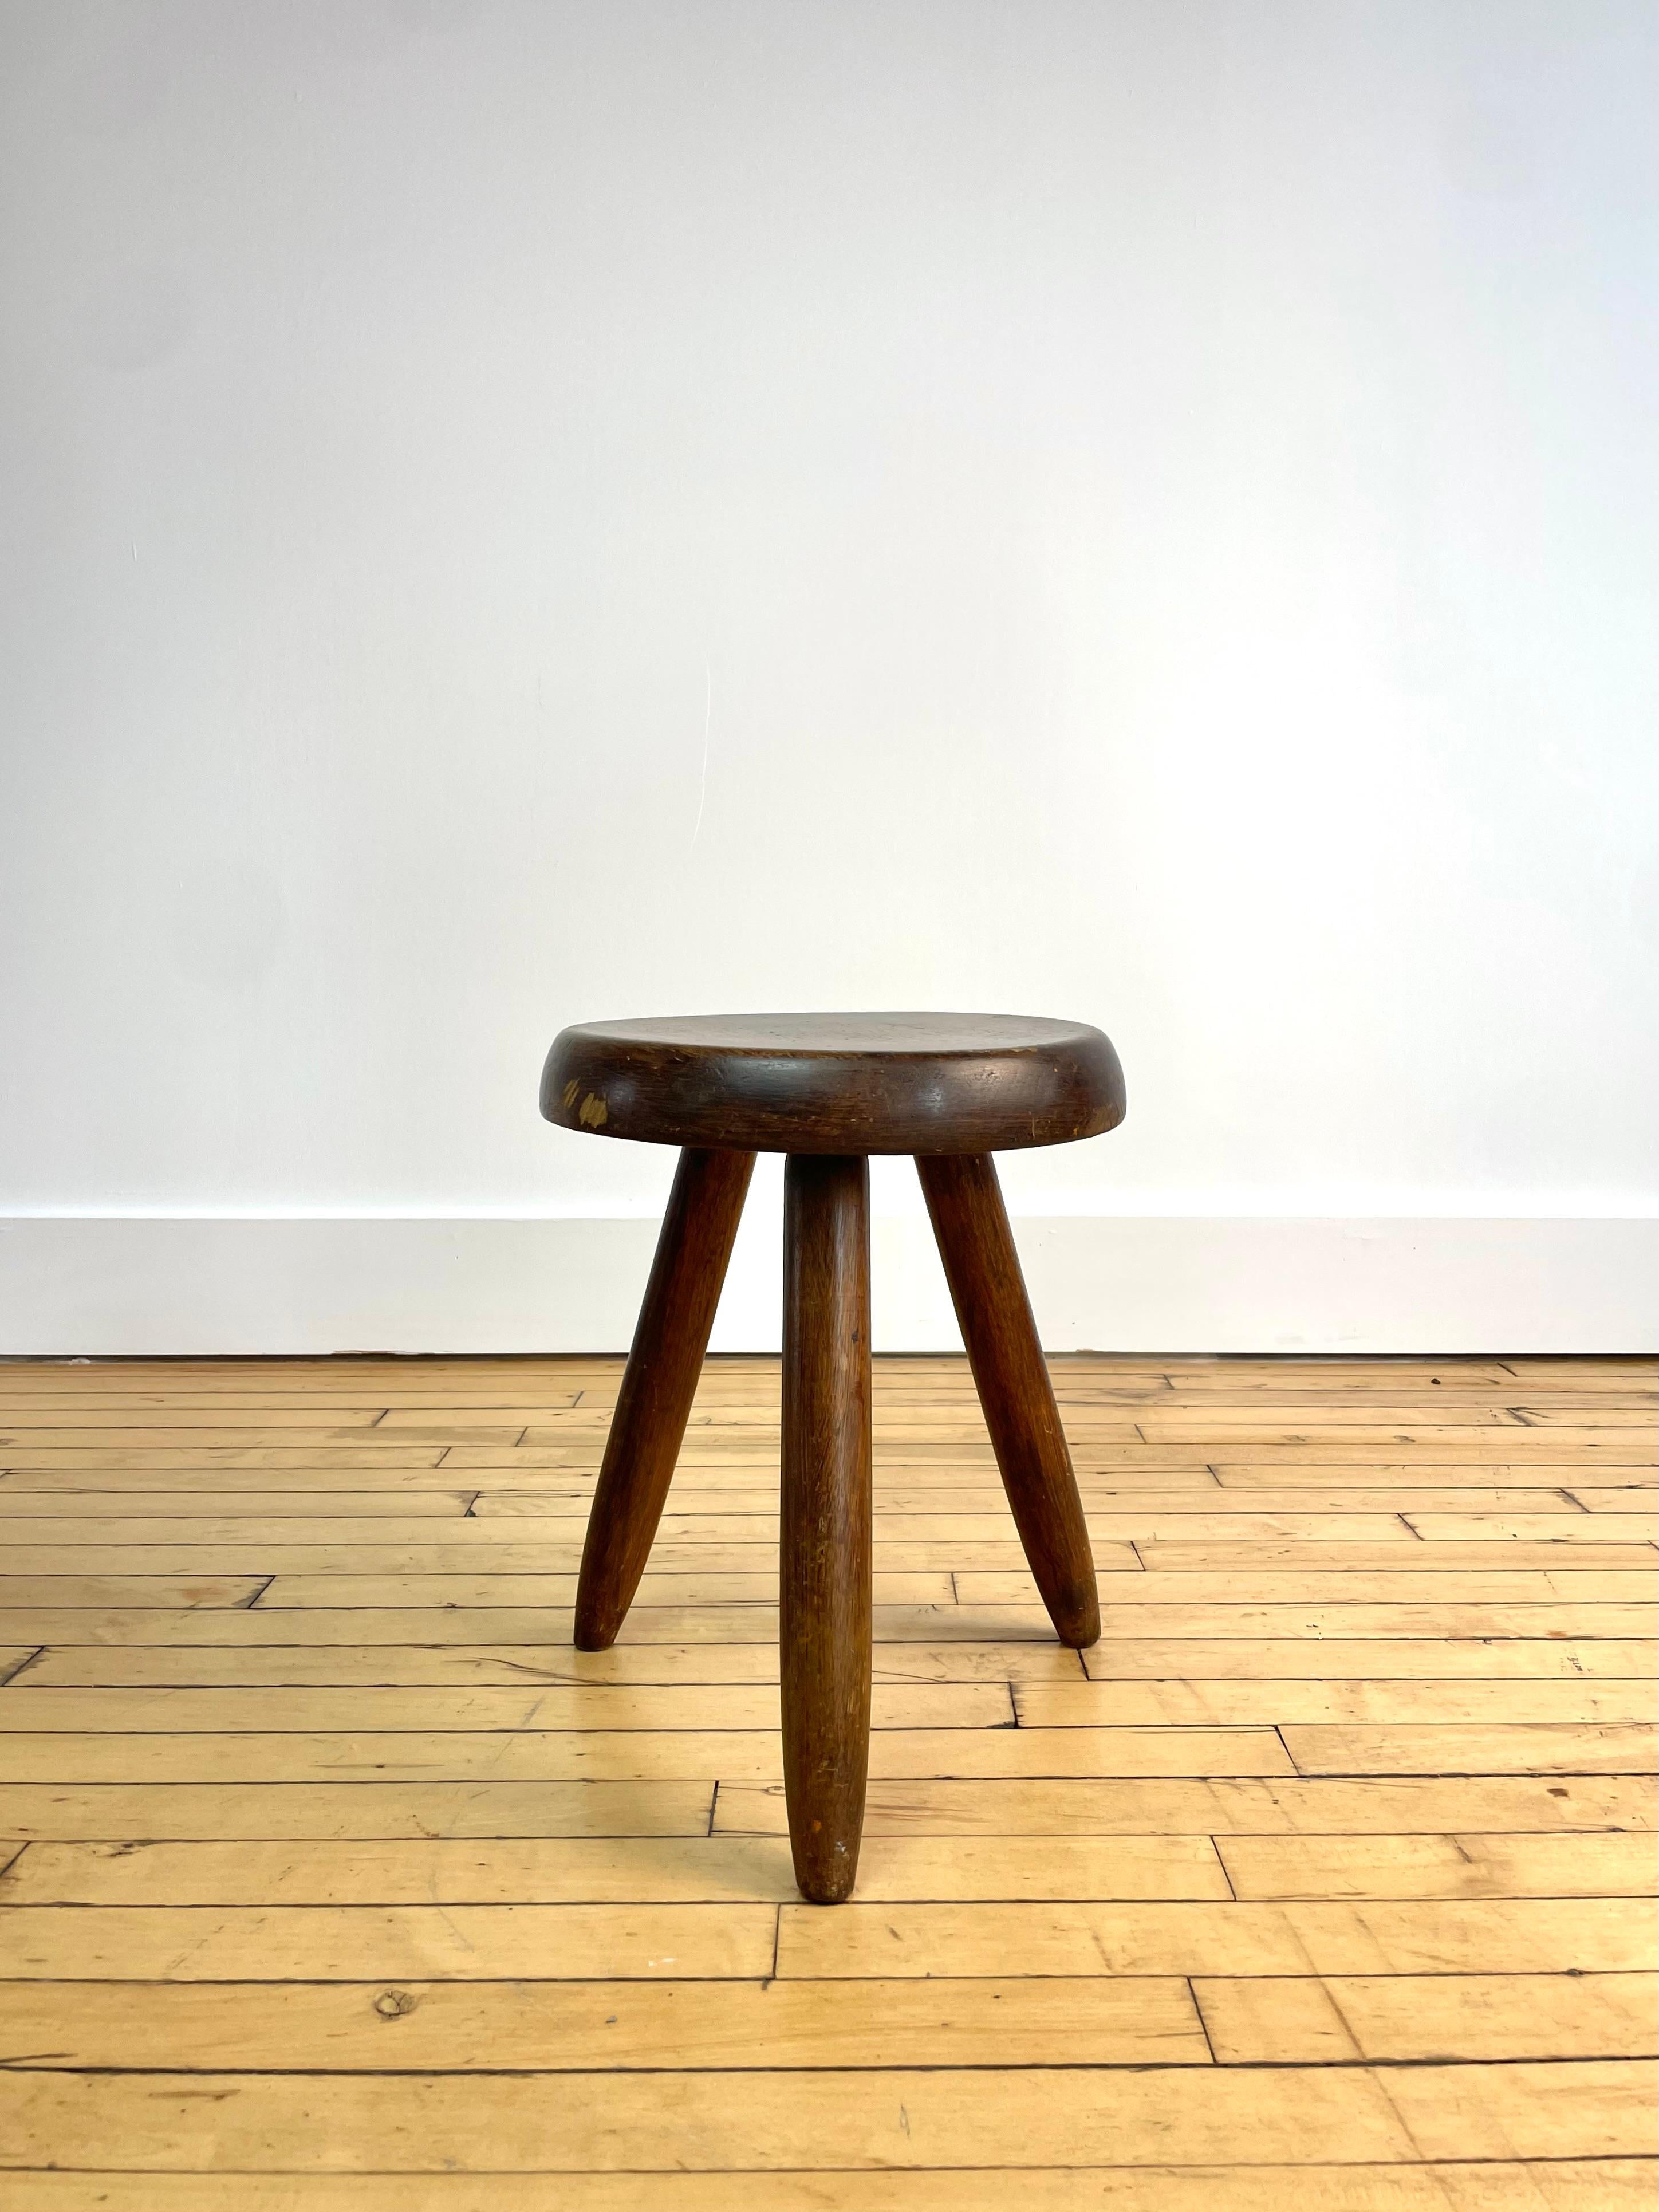 A beautiful example of Charlotte Perriand's Berger stool--her famous modernist interpretation of the classic tripod wood milking stool. 

This particular stool shows considerable wear and age. 

These simple and elegant stools were produced in